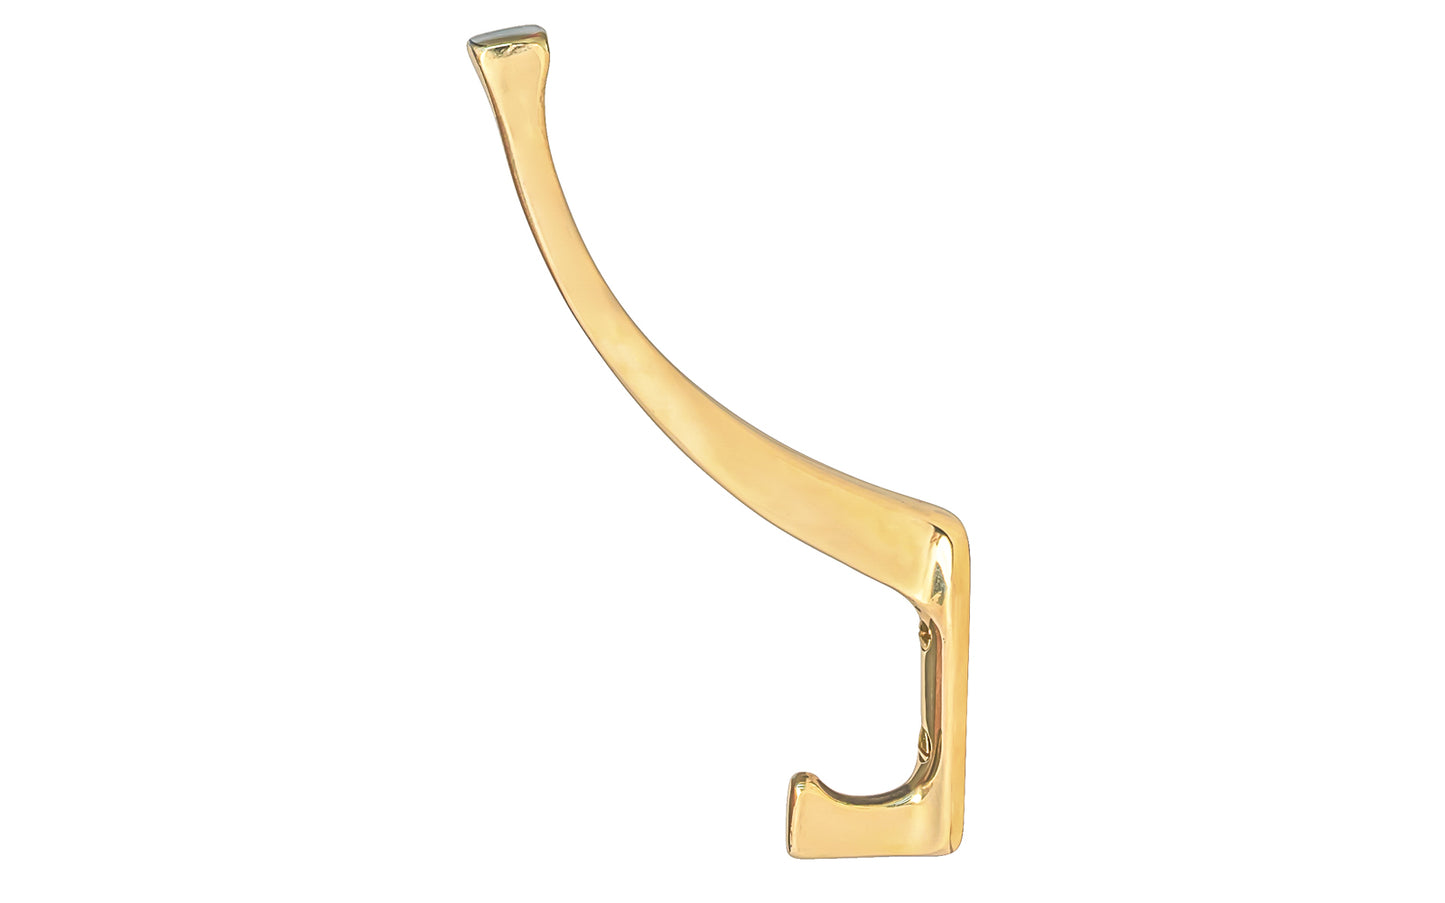 Vintage-style unlacquered brass hall tree hook. Great for kitchens, bathrooms, hallways, hall trees, furniture, bedrooms. Made of solid brass material, the hook is durable for clothing, towels, bags. Non-lacquered brass (will patina over time). Timeless classic hook. Mission Style / Arts & Crafts, Craftsman Style.